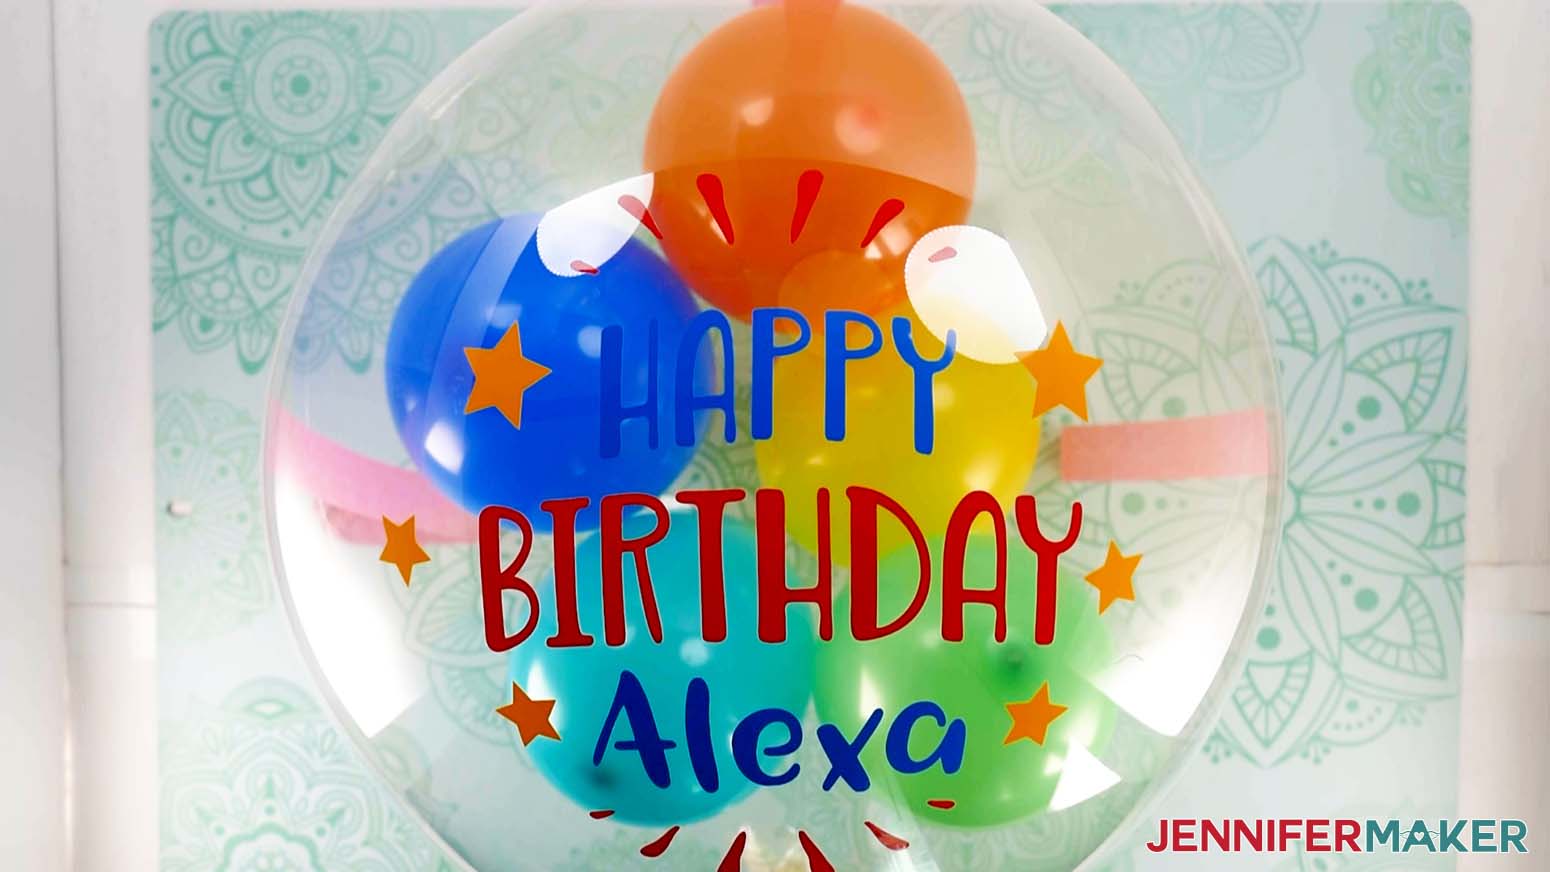 An overhead photo showing a vinyl balloon bouquet decal that says Happy Birthday Alexa applied to an inflated Bobo balloon, which is secured to the work surface below with tape